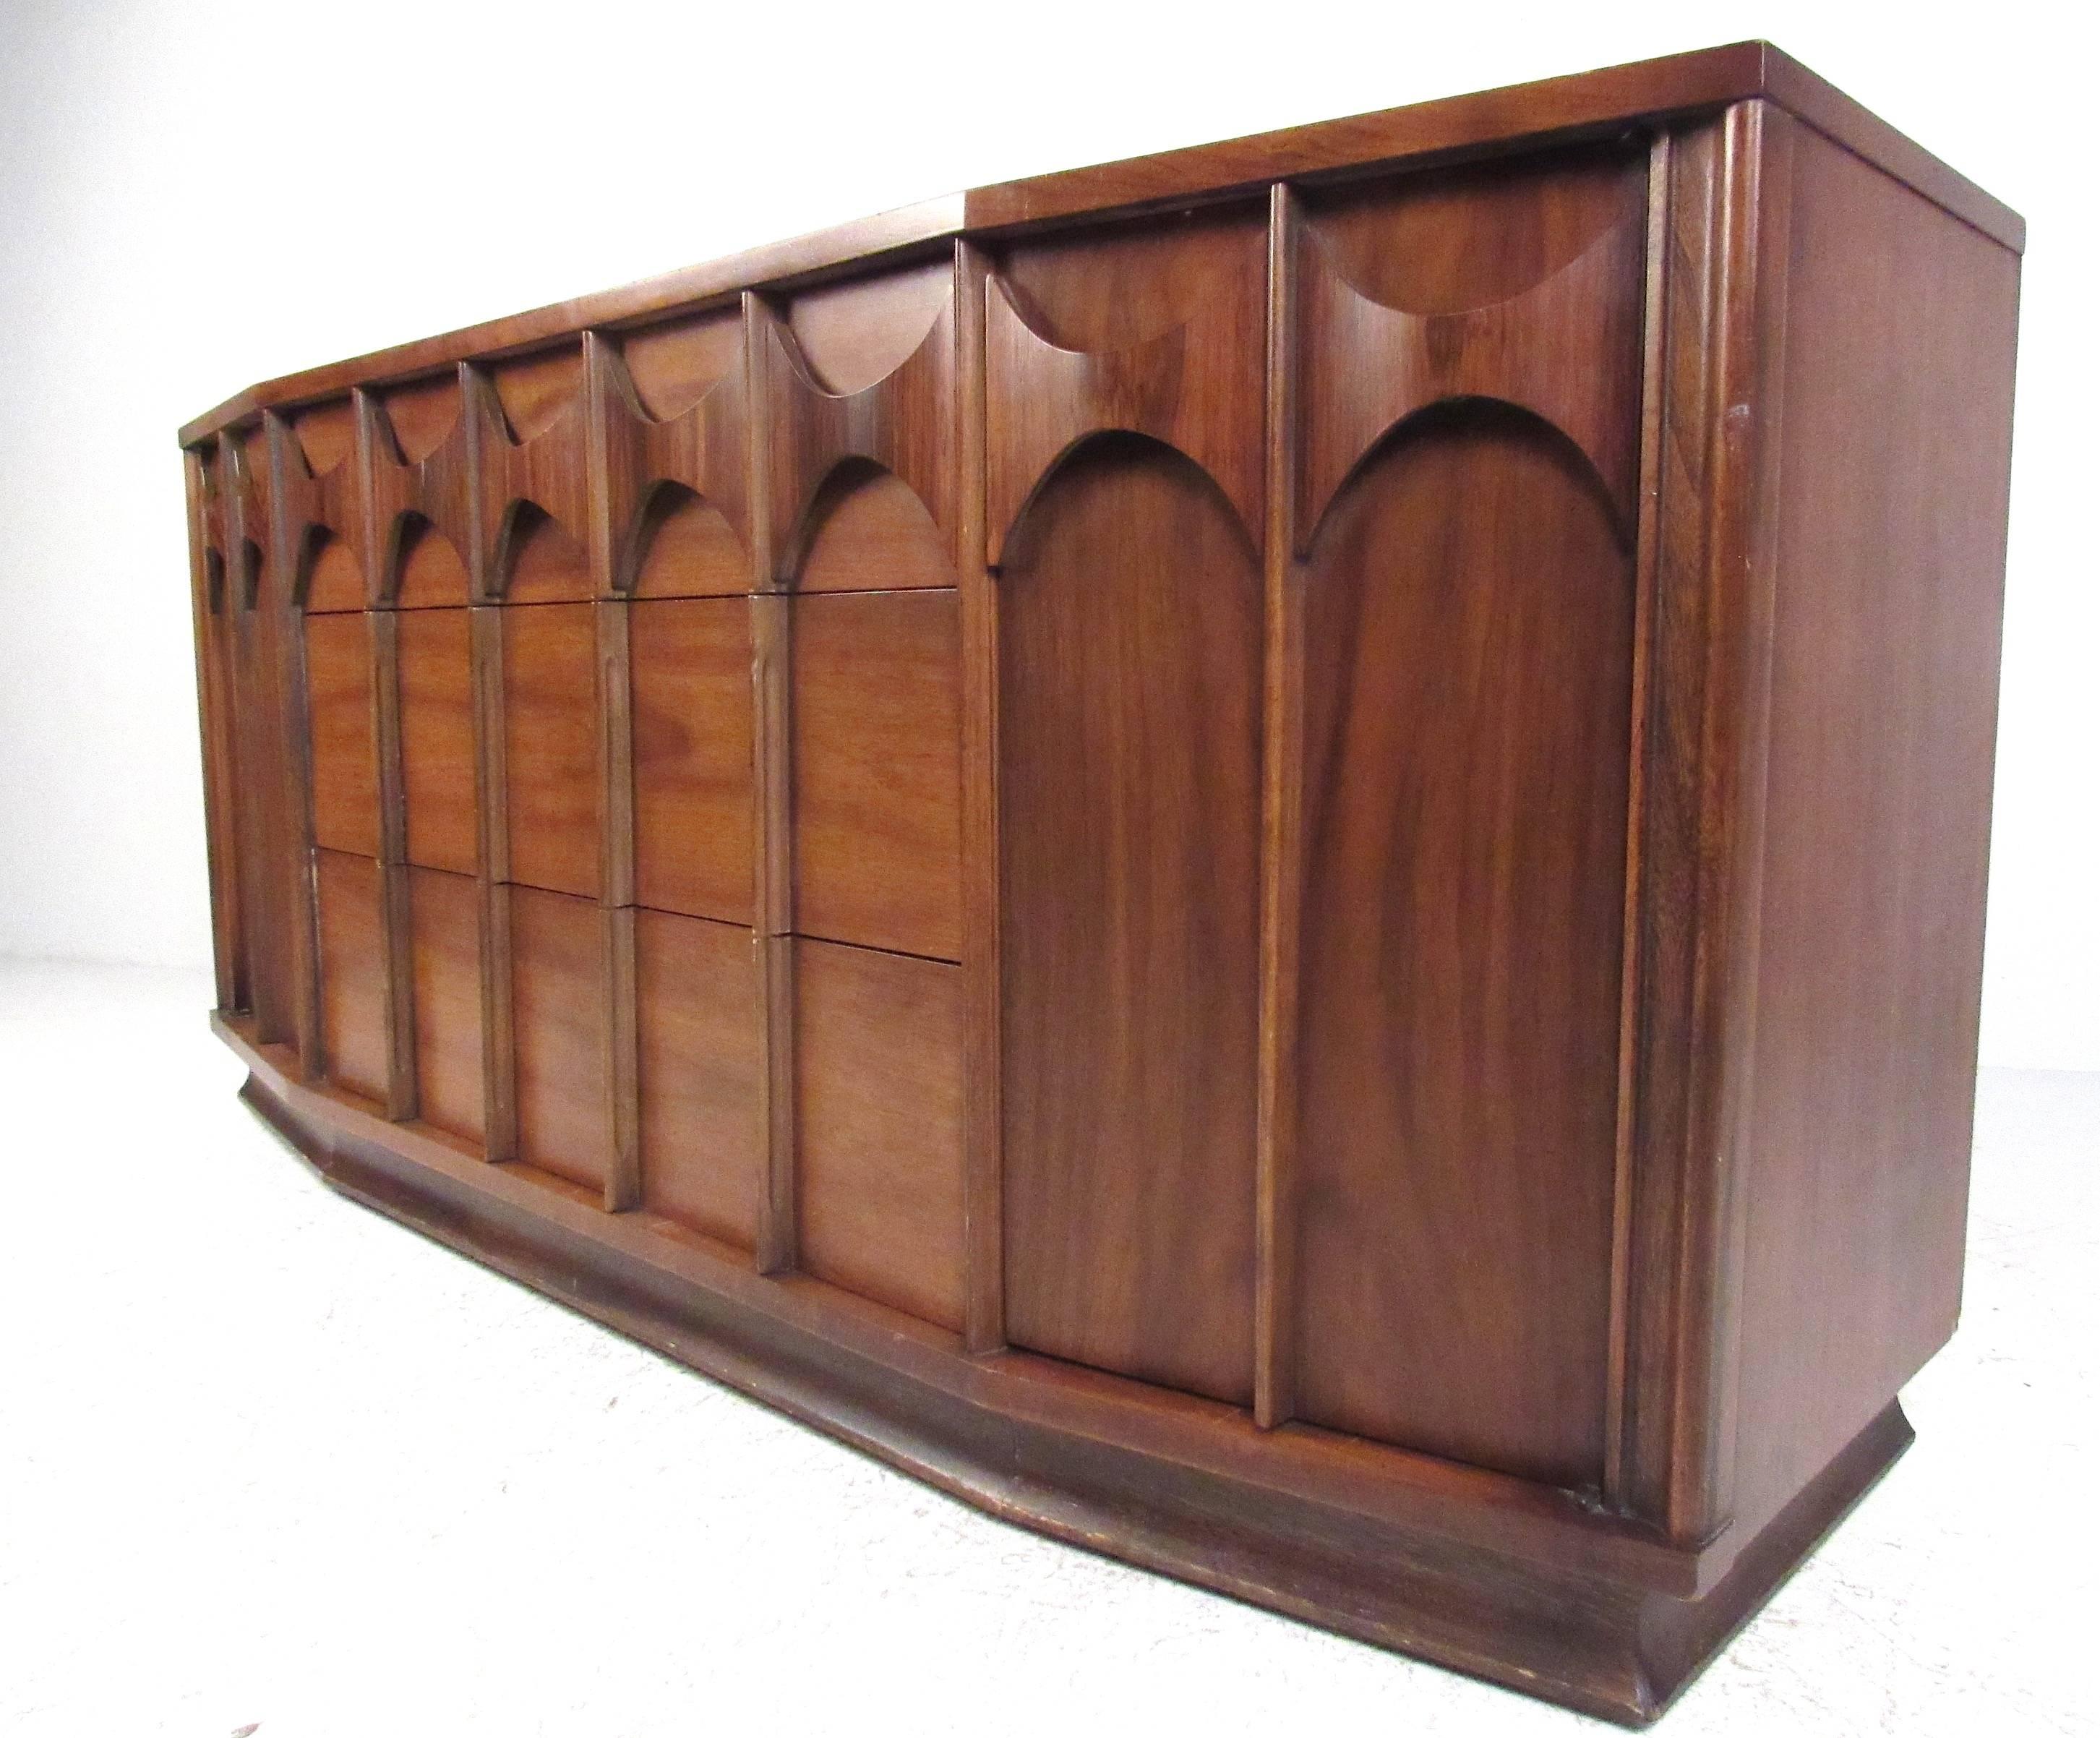 Brasilia style dresser by Kent Coffey for his Perspecta collection. Sculptural front walnut dresser consisting of three deep center drawers flanked by two doors with six additional drawers providing ample storage. Matching tall dresser and